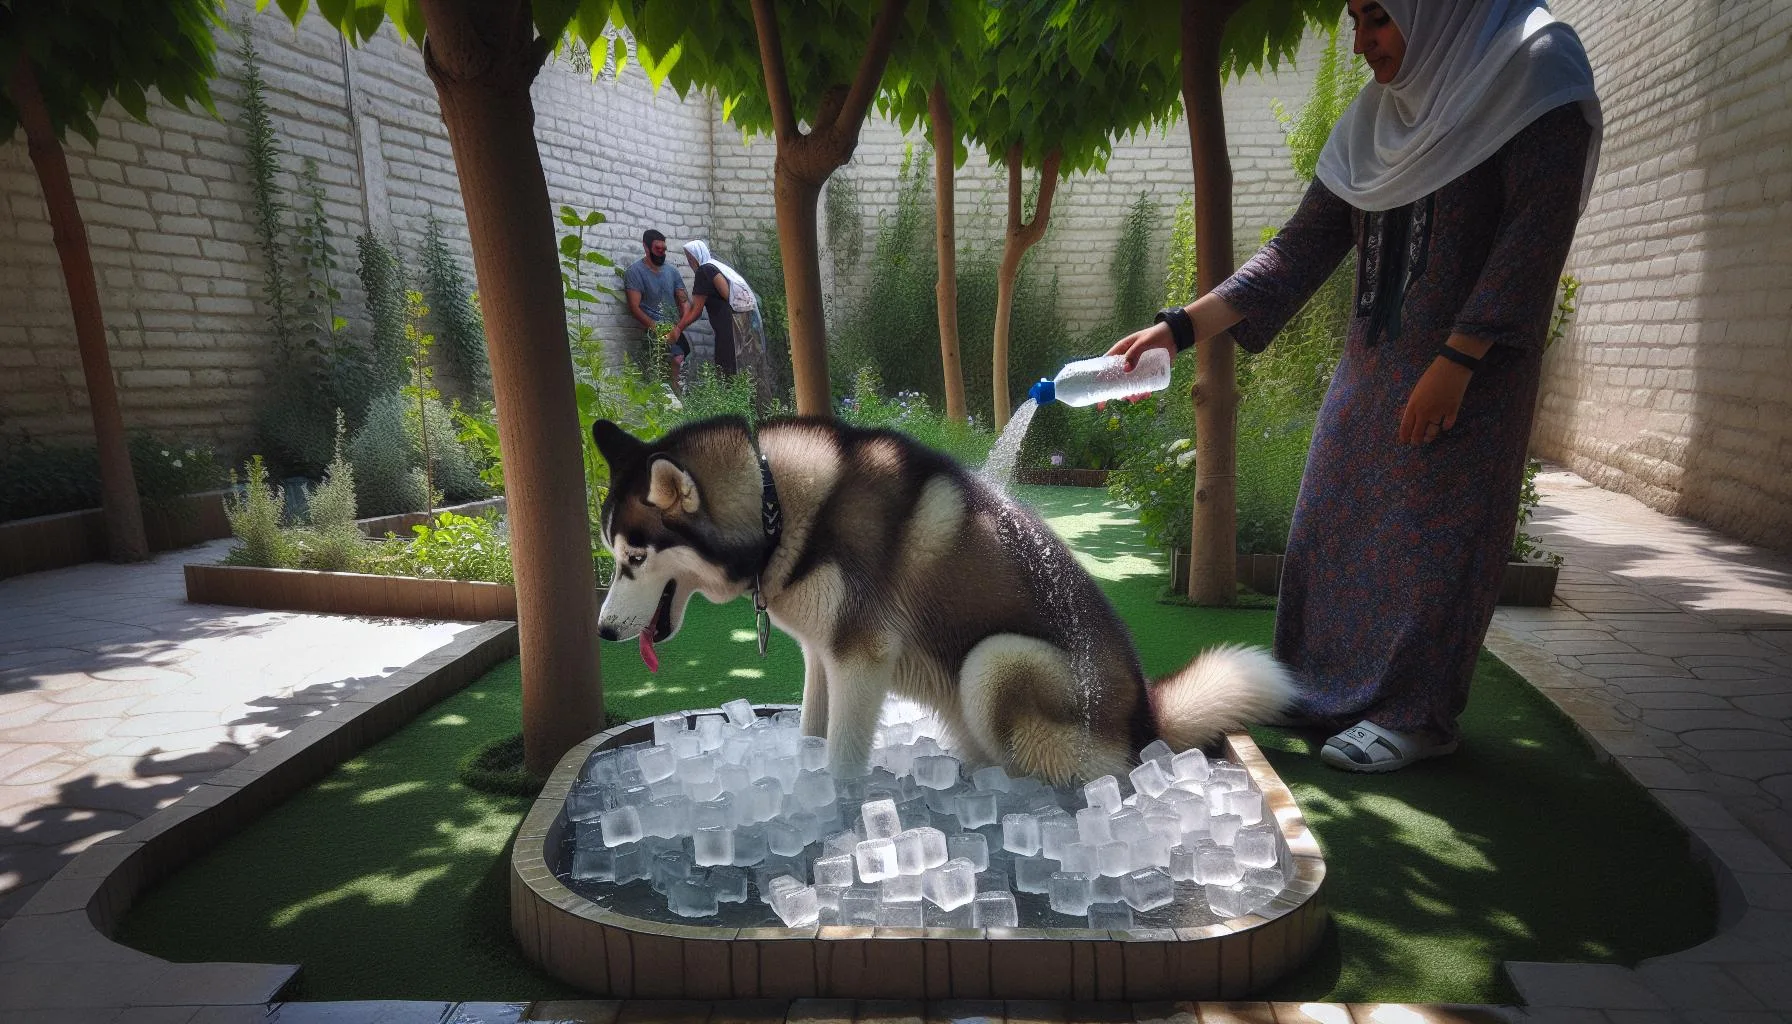 How to keep husky cool The Importance of Hydration